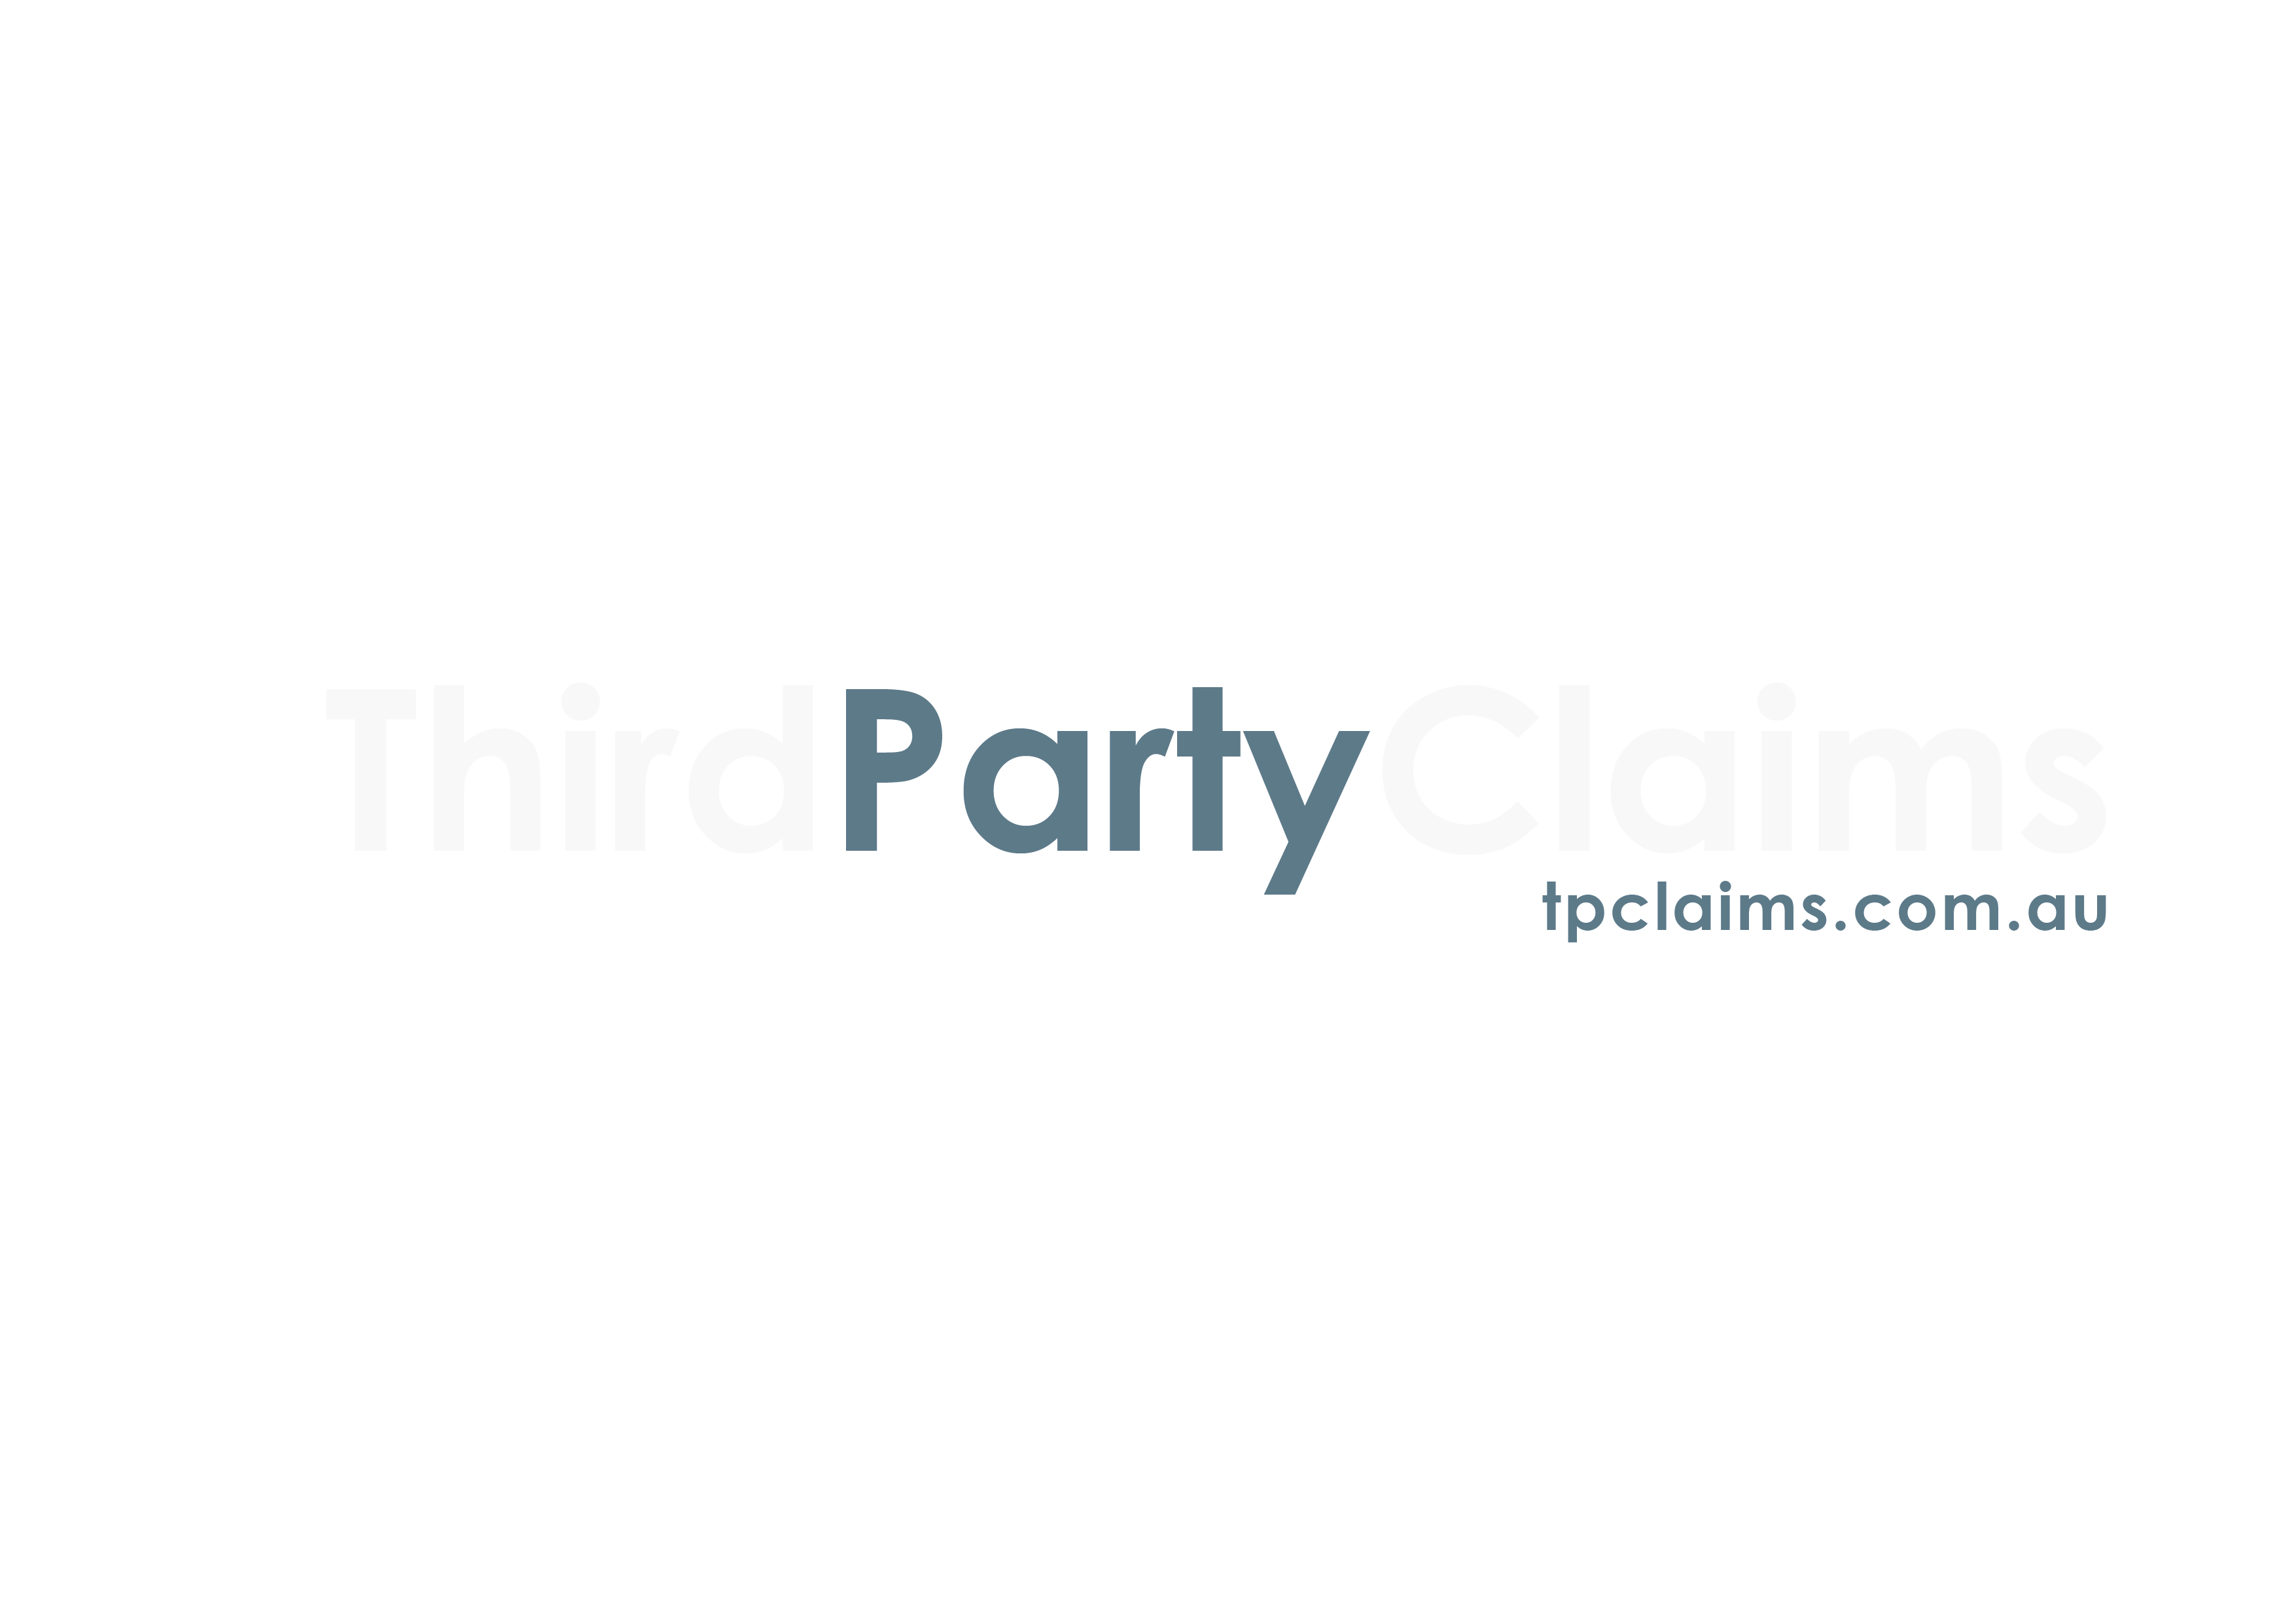 Third Party Claims